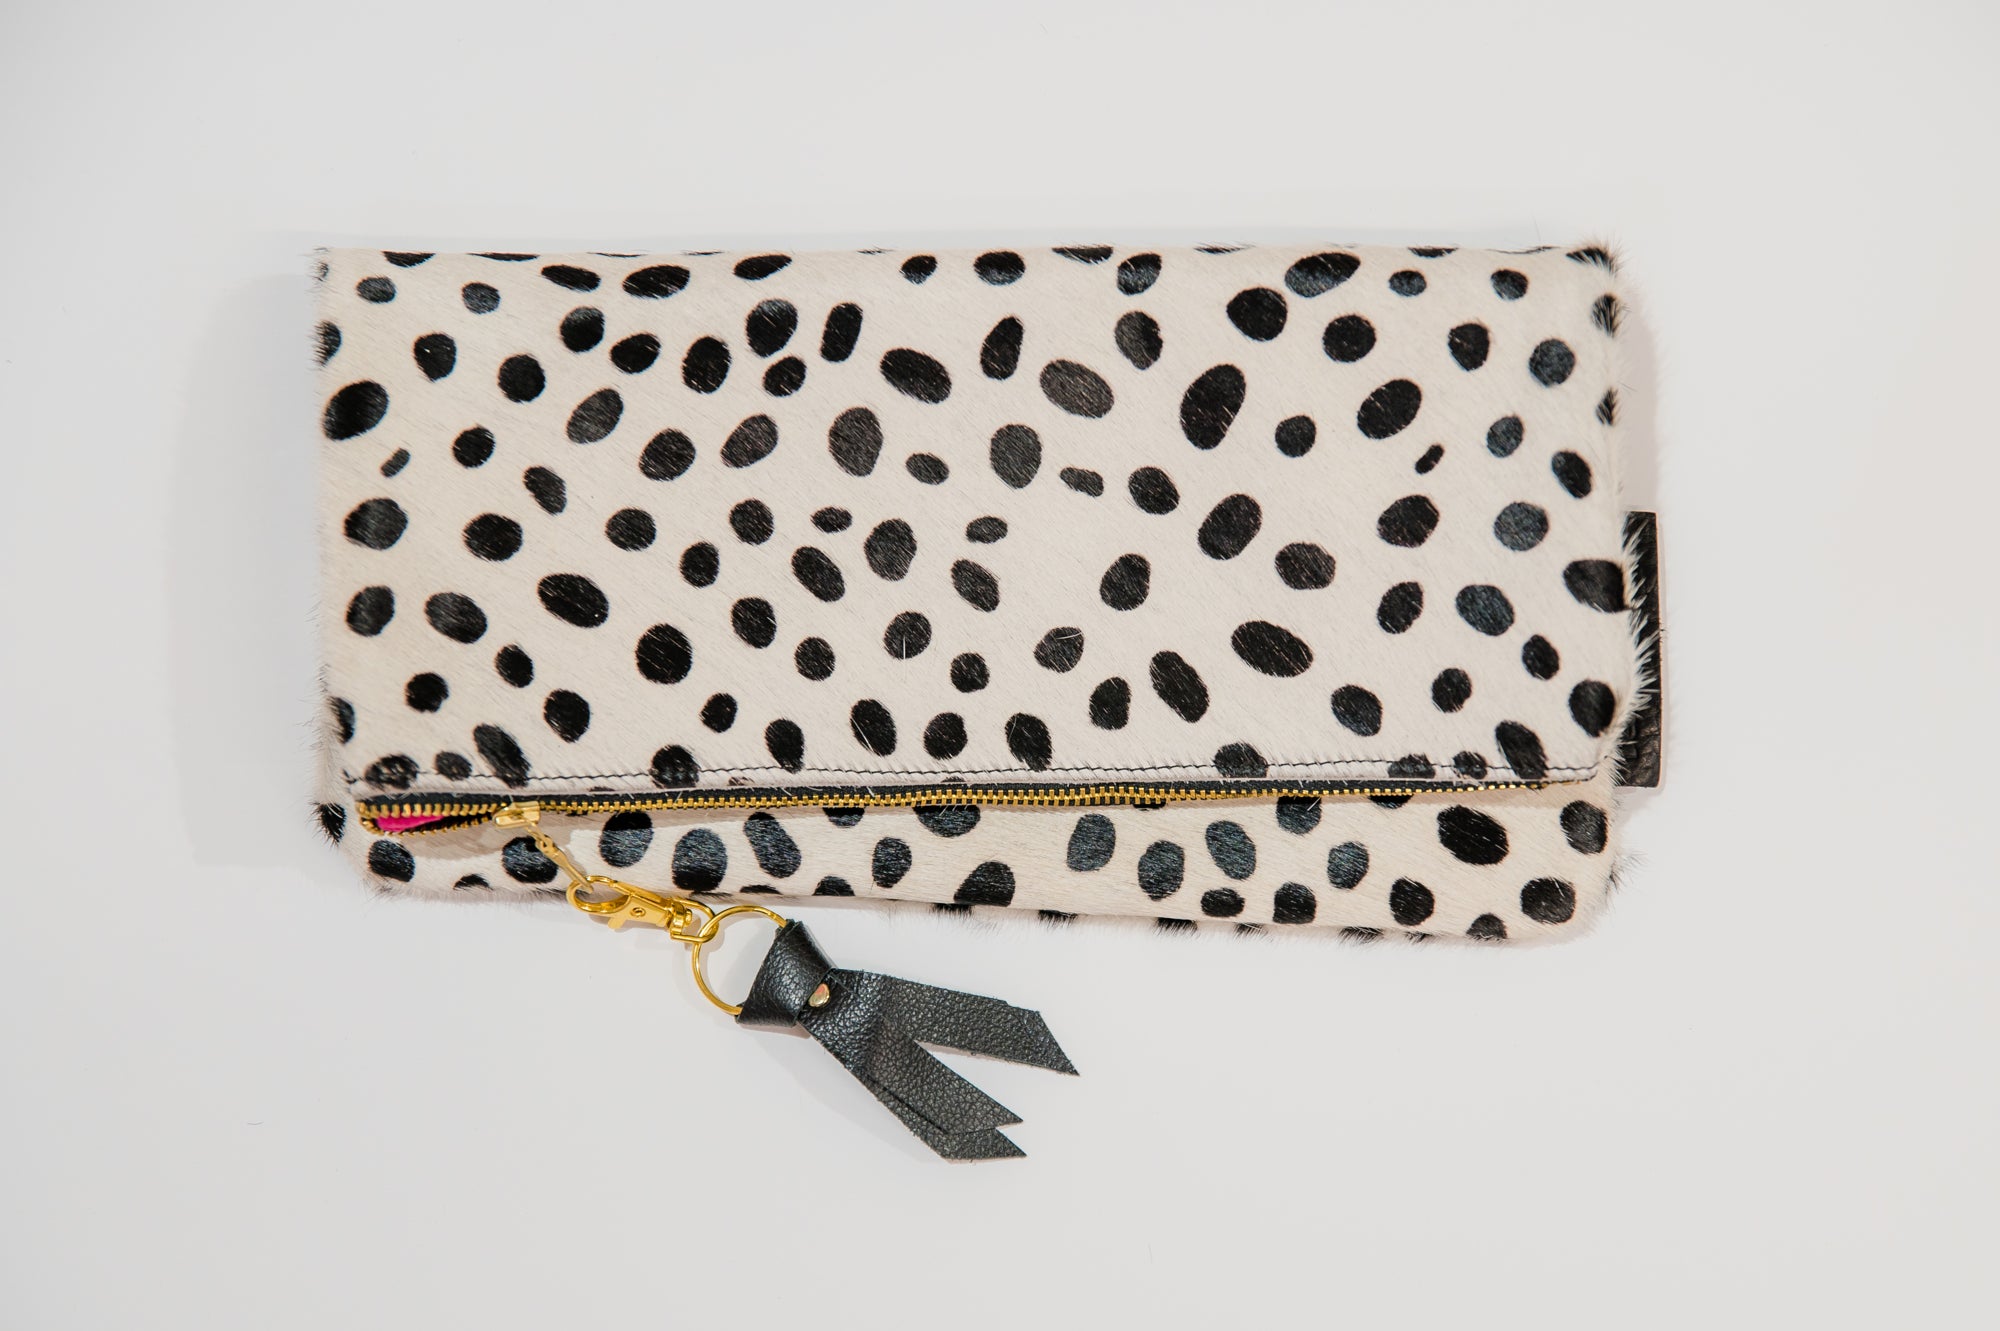 Hair on Leather Foldover Clutch White and Black Cheetah